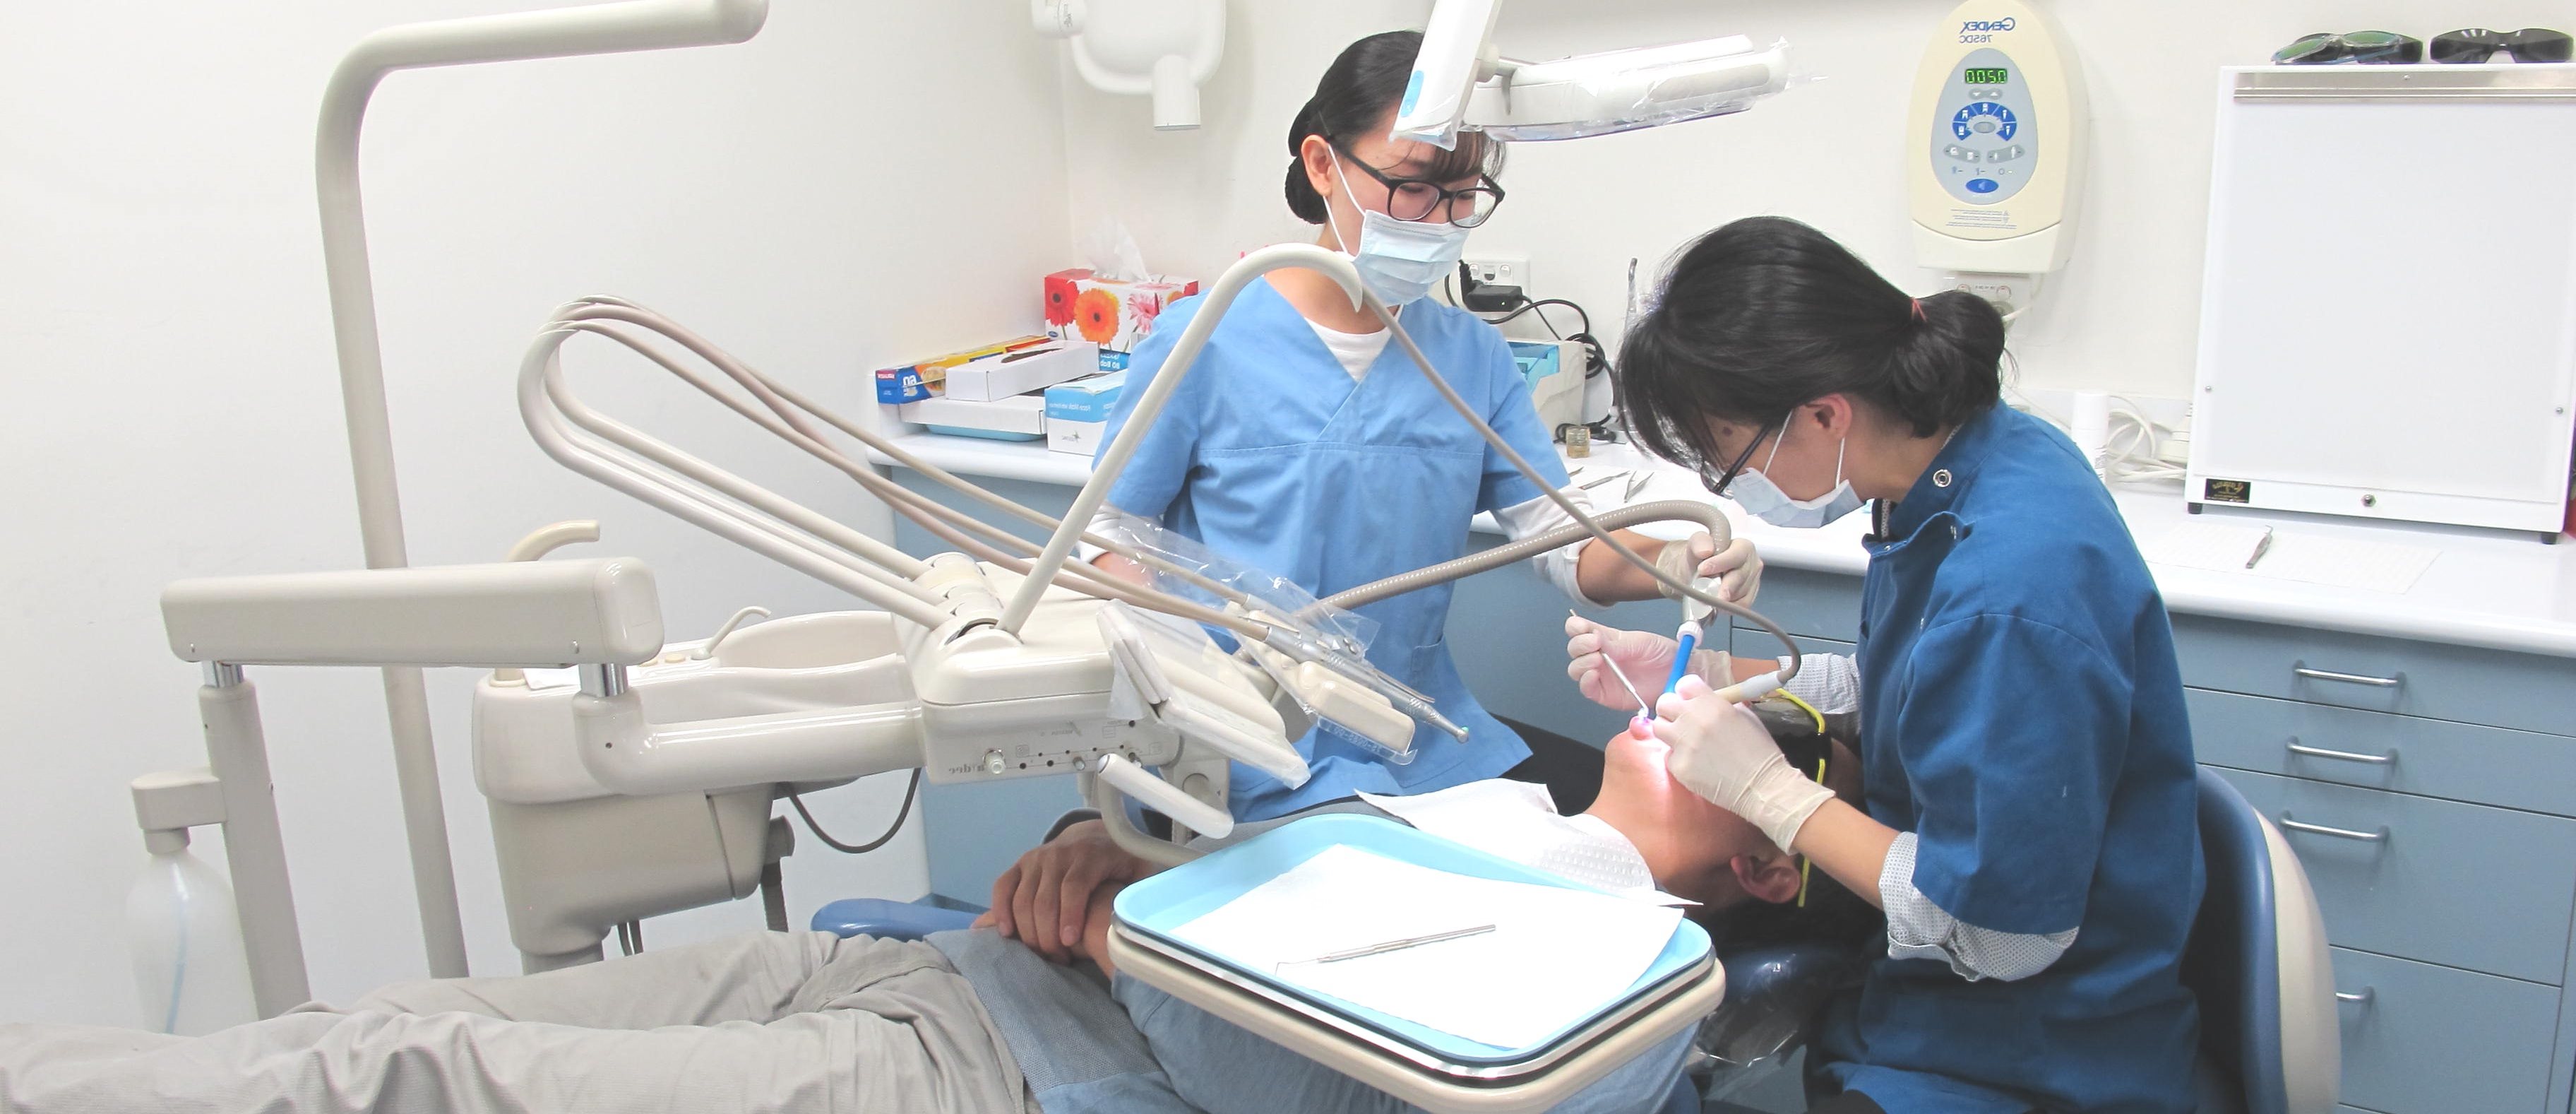 We provide a wide range of dental professional services Since we all enjoy working together as a team, we are able to achieve the best possible dental results for our patients.